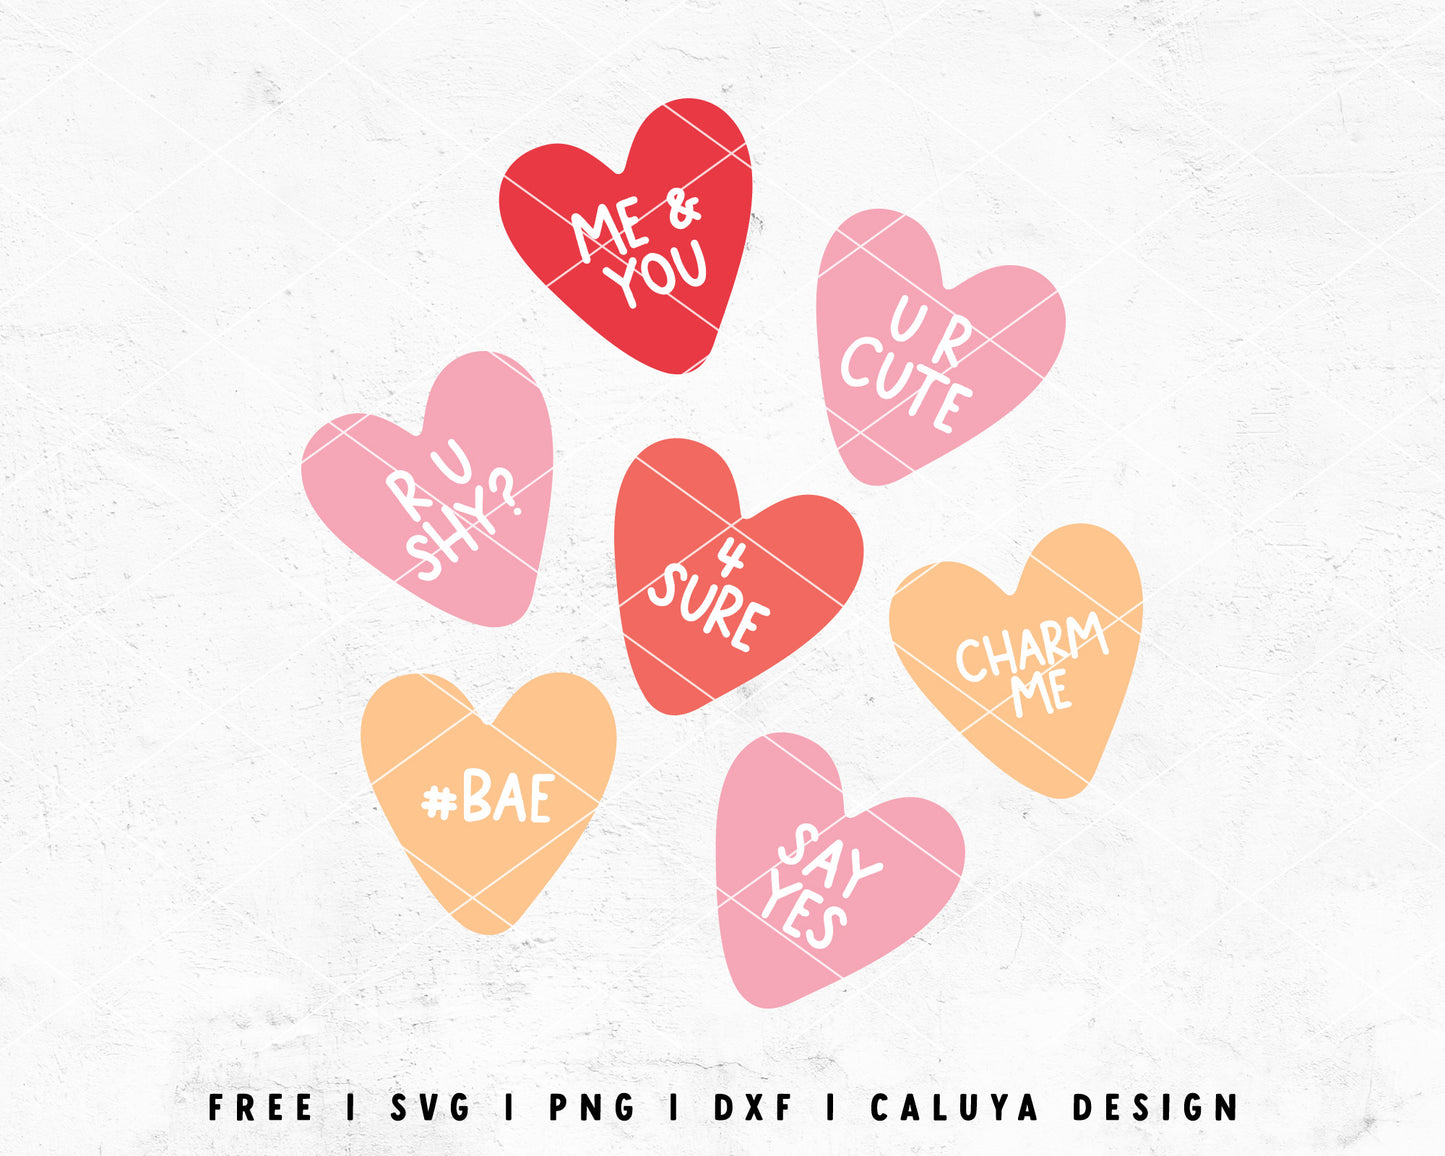 FREE Valentines Day Candy SVG | Heart Candy SVG Cut File for Cricut, Cameo Silhouette | Free SVG Cut File